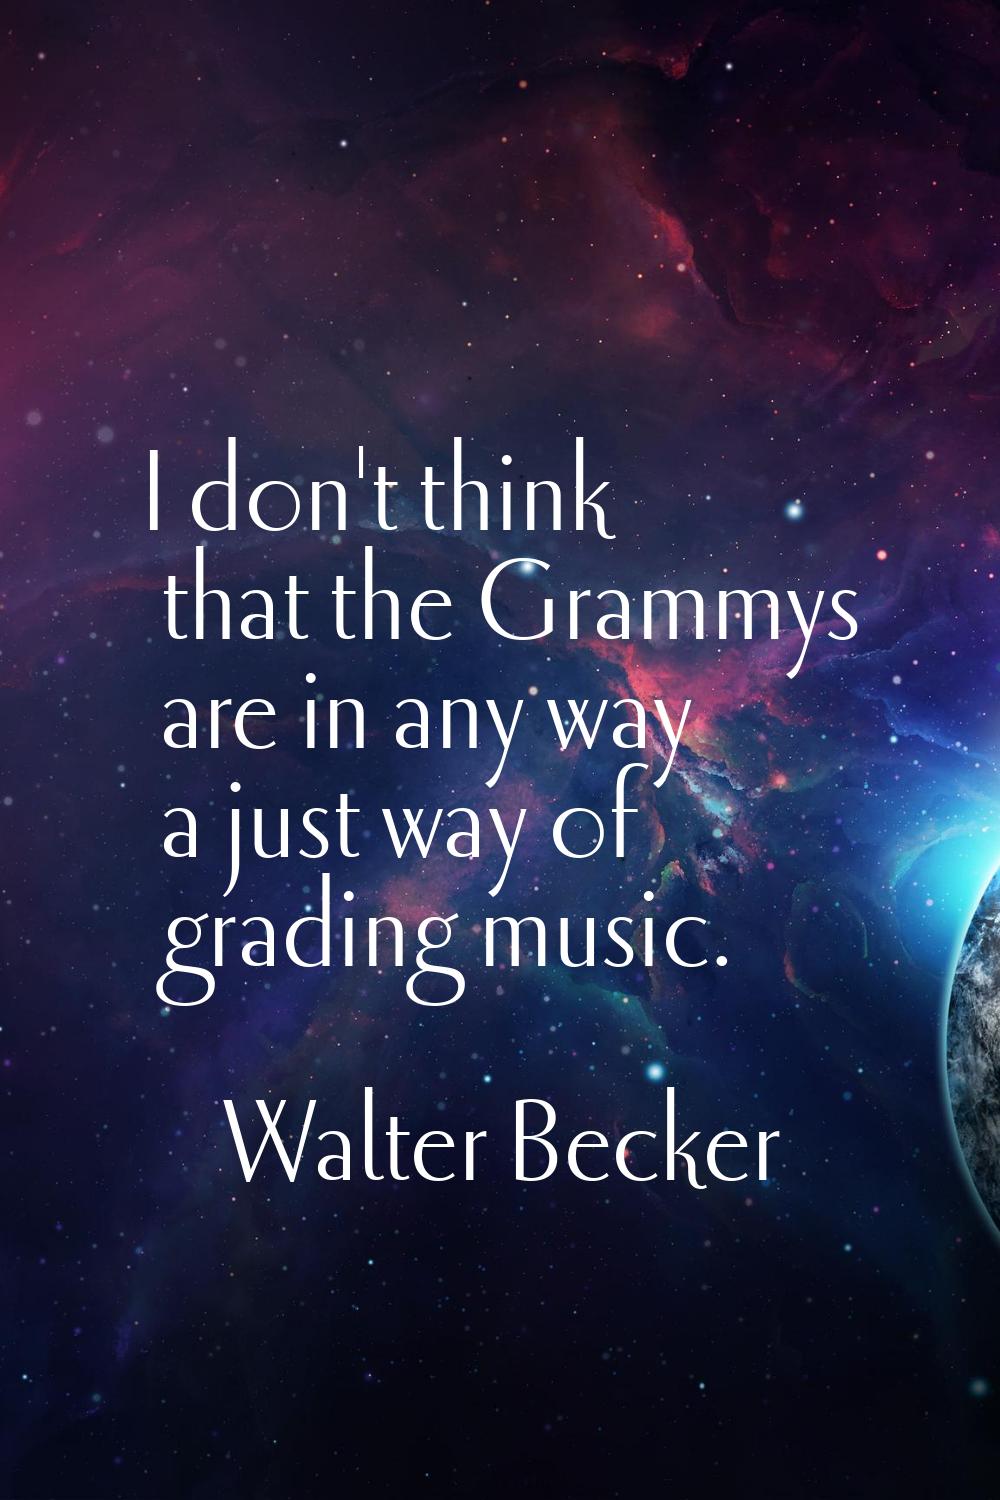 I don't think that the Grammys are in any way a just way of grading music.